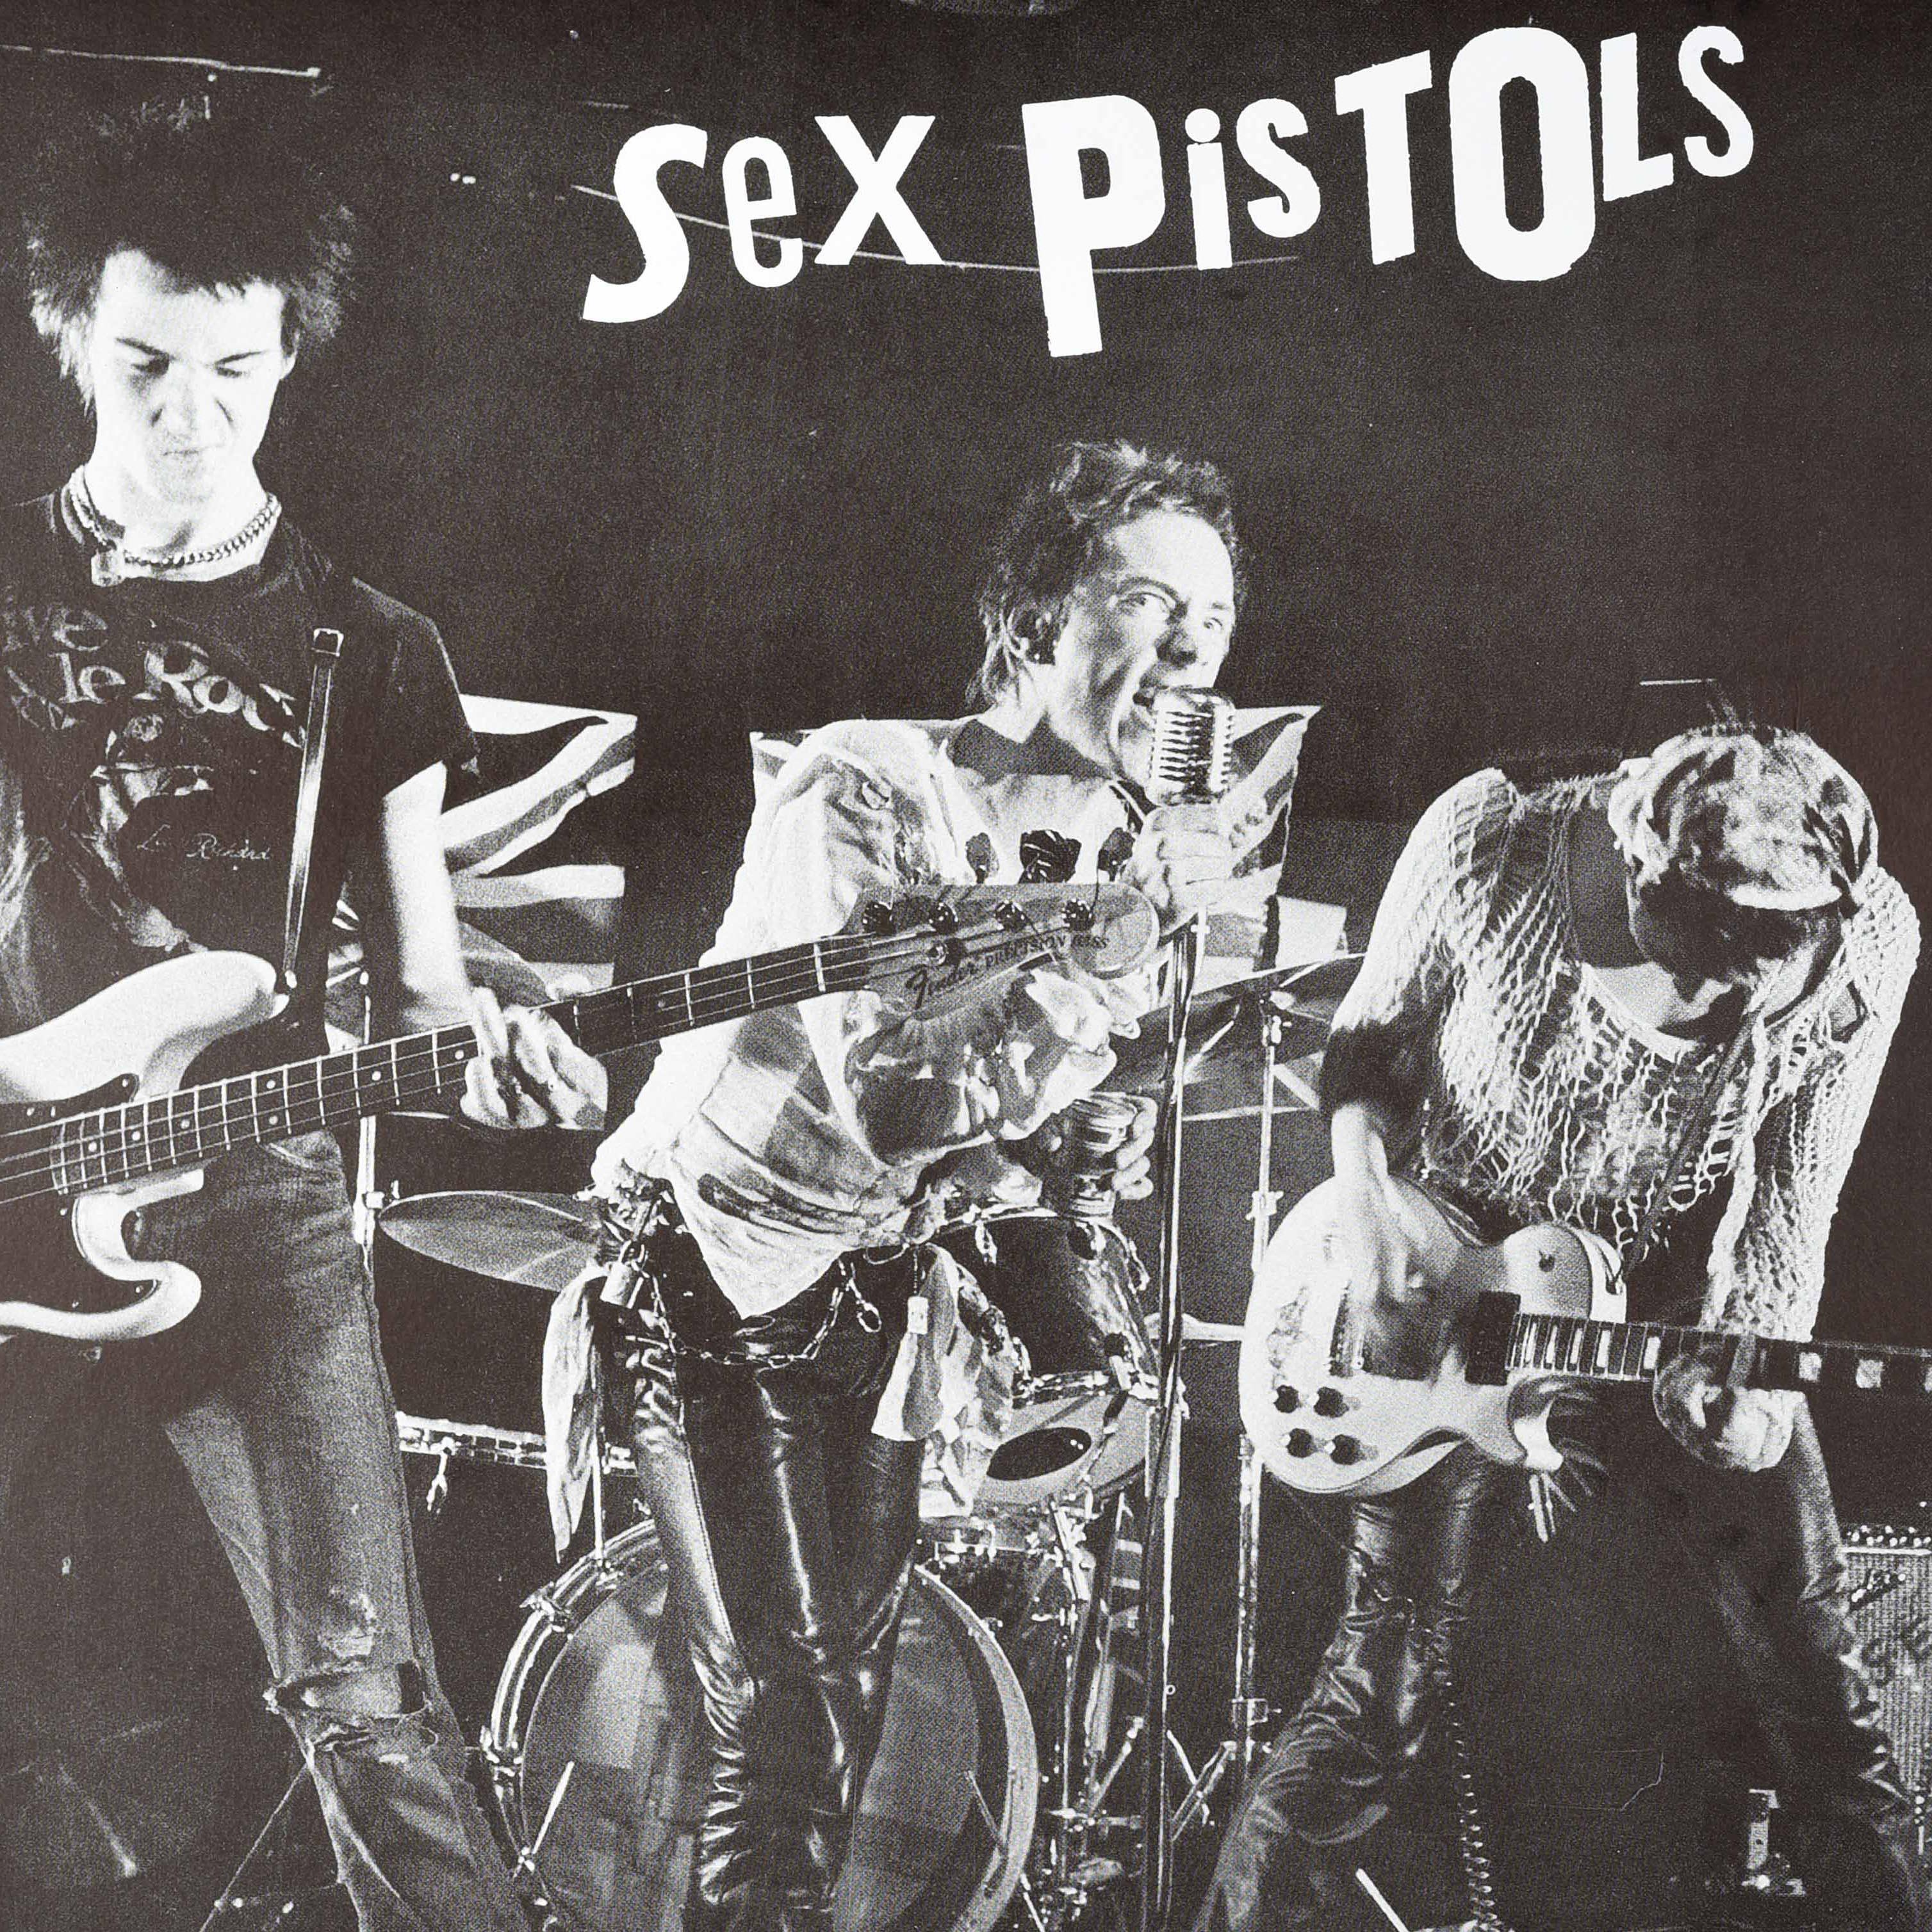 Original vintage music tour advertising poster for the debut single released by the influential English punk rock band the Sex Pistols (1975-1978 and later reunions) in 1976 - Sex Pistols Anarchy in the UK - featuring a black and white photo of the